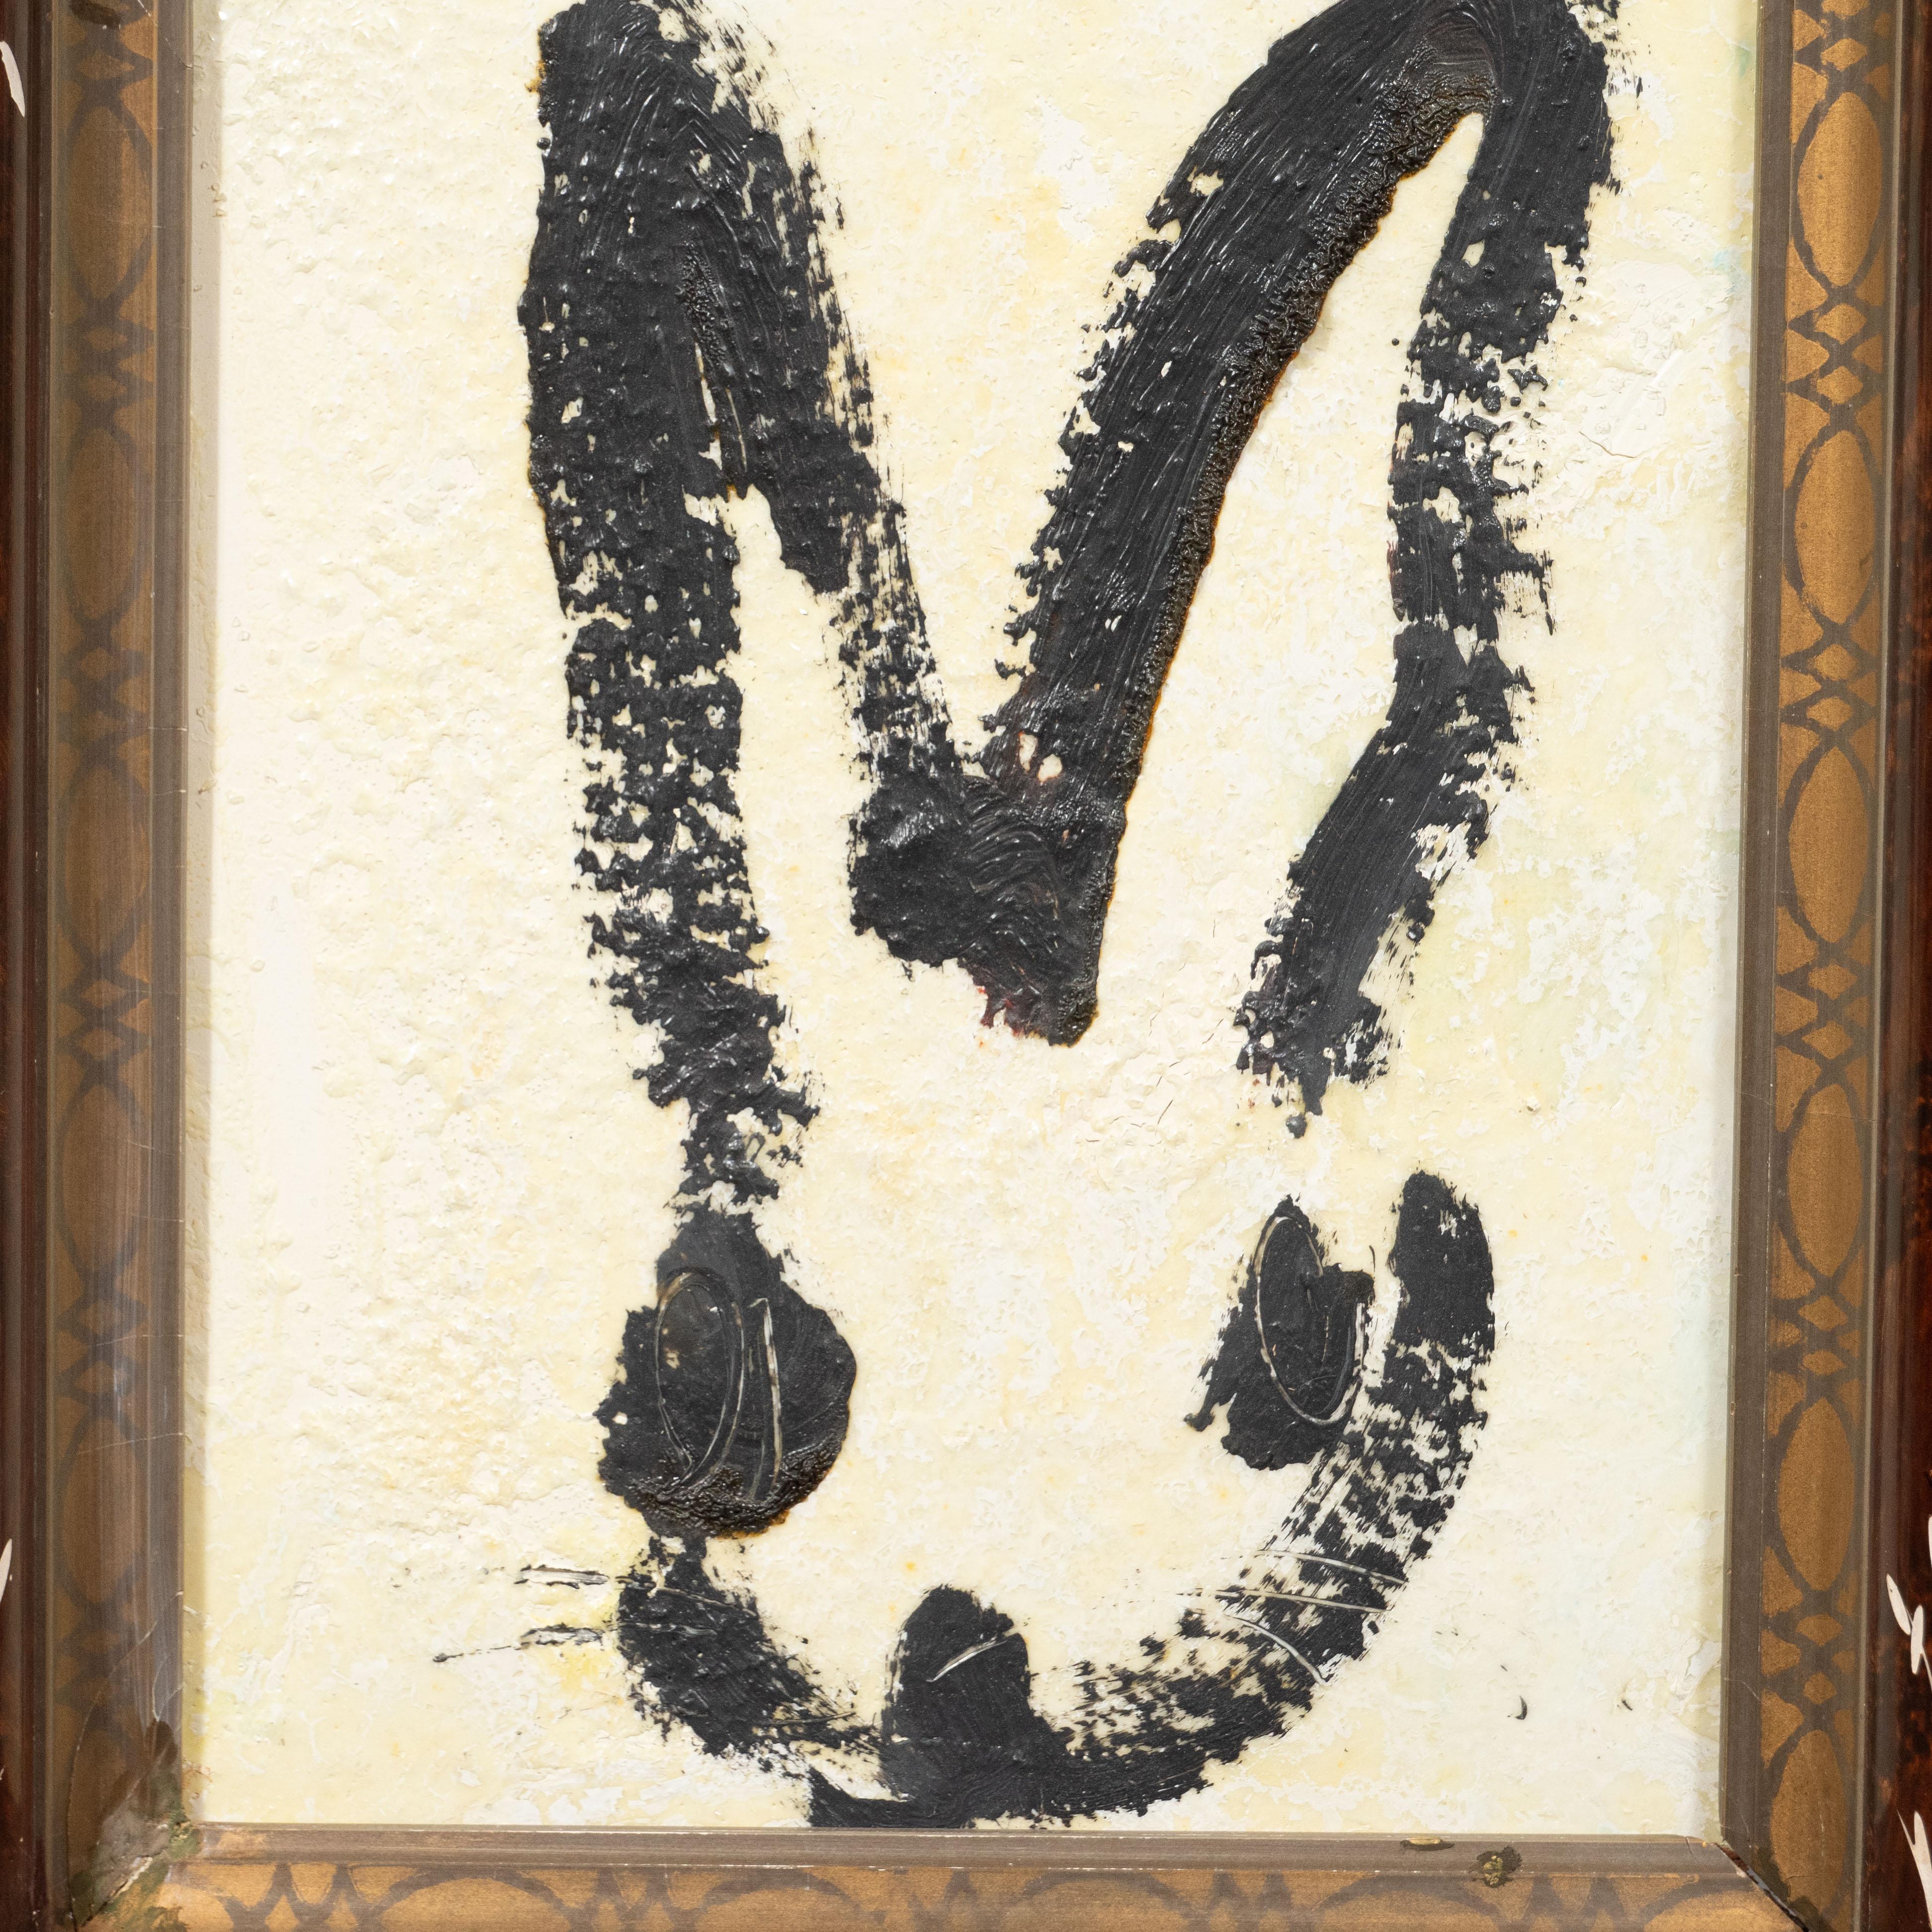 This whimsical and sophisticated painting was realized by the esteemed contemporary painter, Hunt Slonem in 2013. It presents a stylized rabbit in profile, rendered with loose and expressive brush strokes in black and white paint with a sprinkling